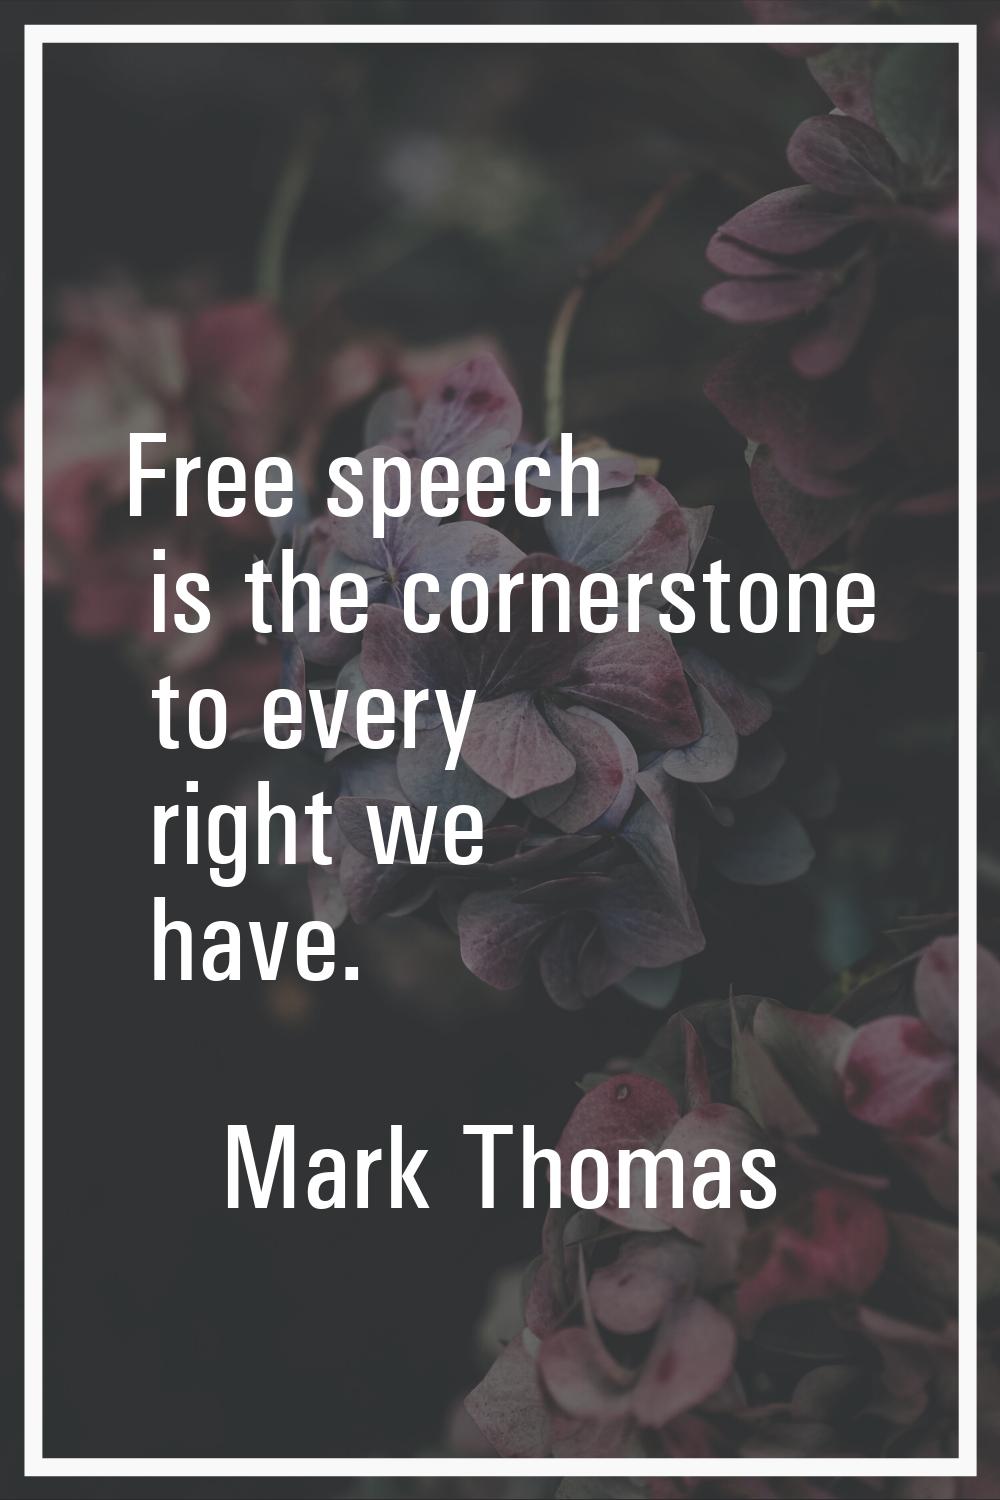 Free speech is the cornerstone to every right we have.